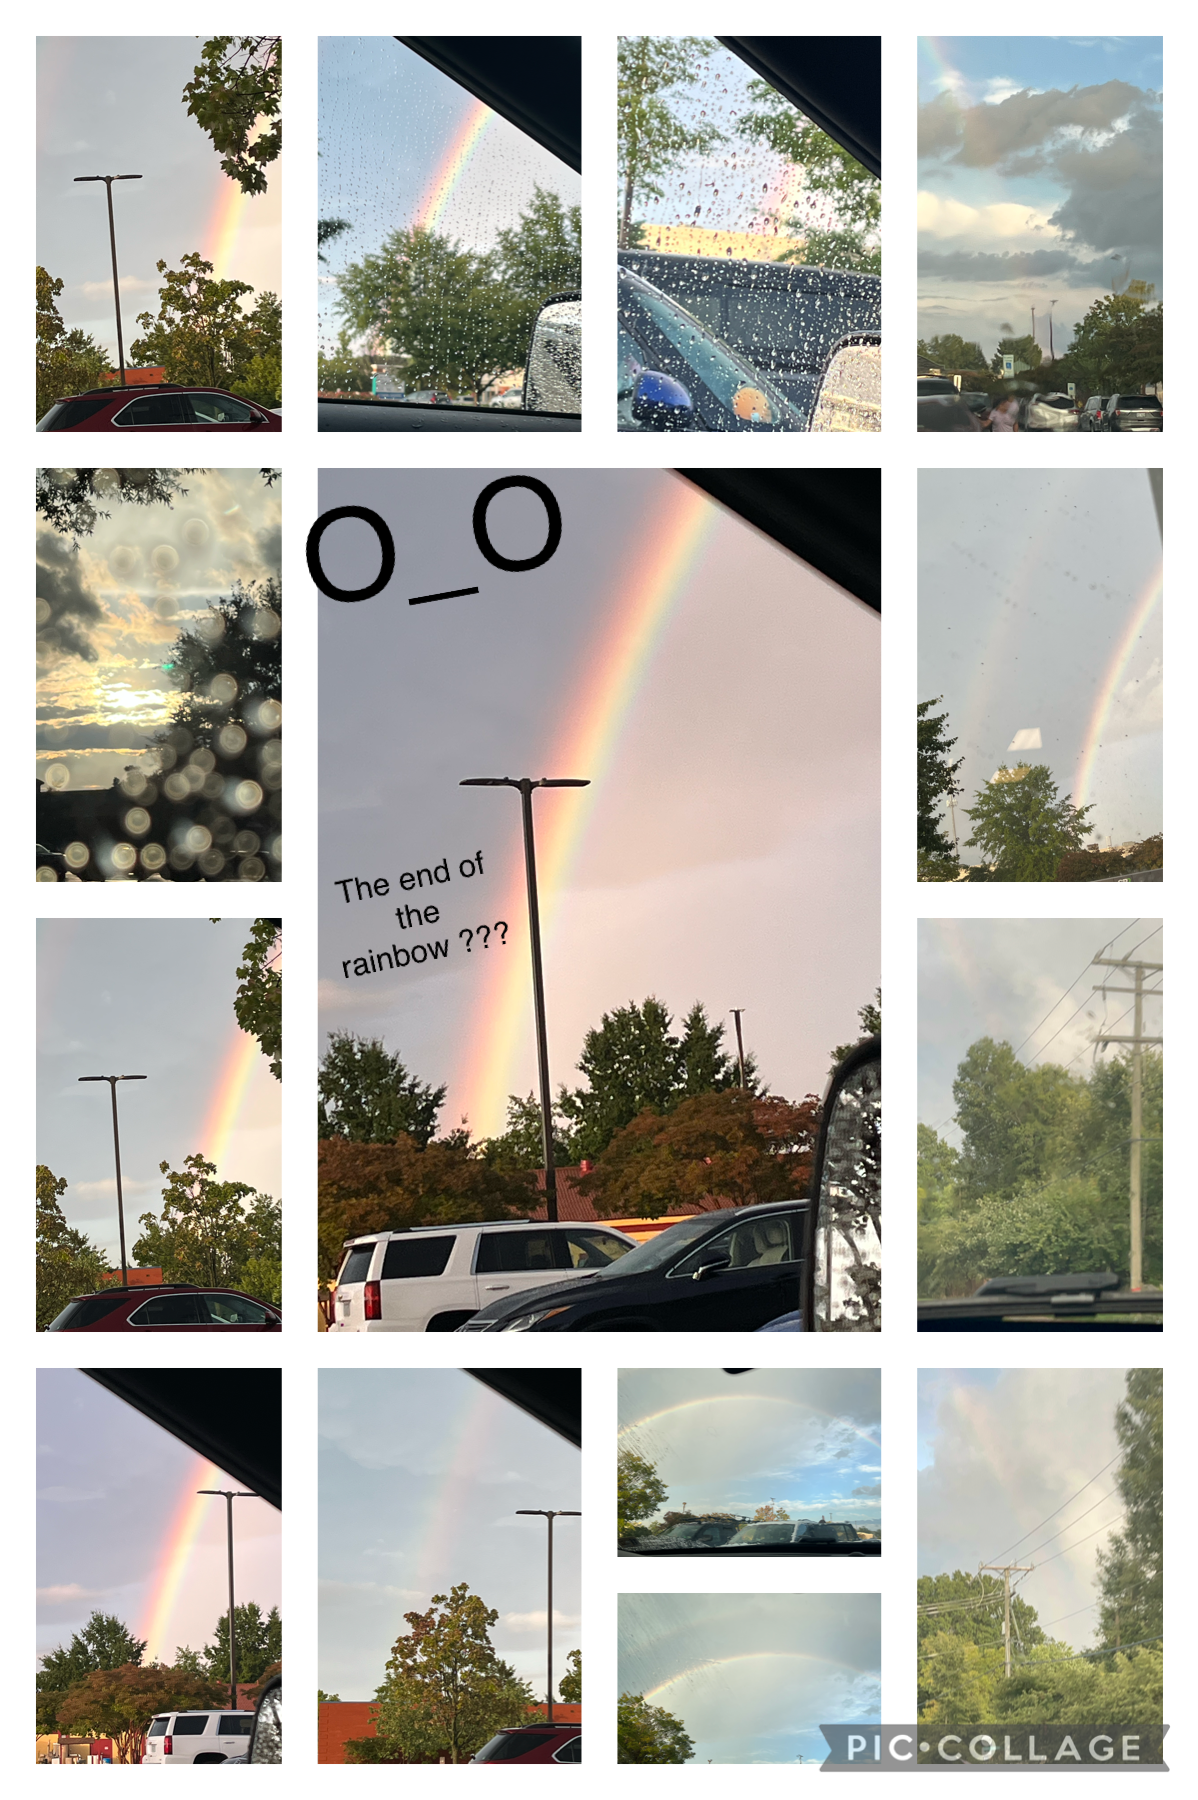 Monday we saw this and there where 2 rainbows and the end was in our neighborhood and the other was there it was weird idk how to explain tbh